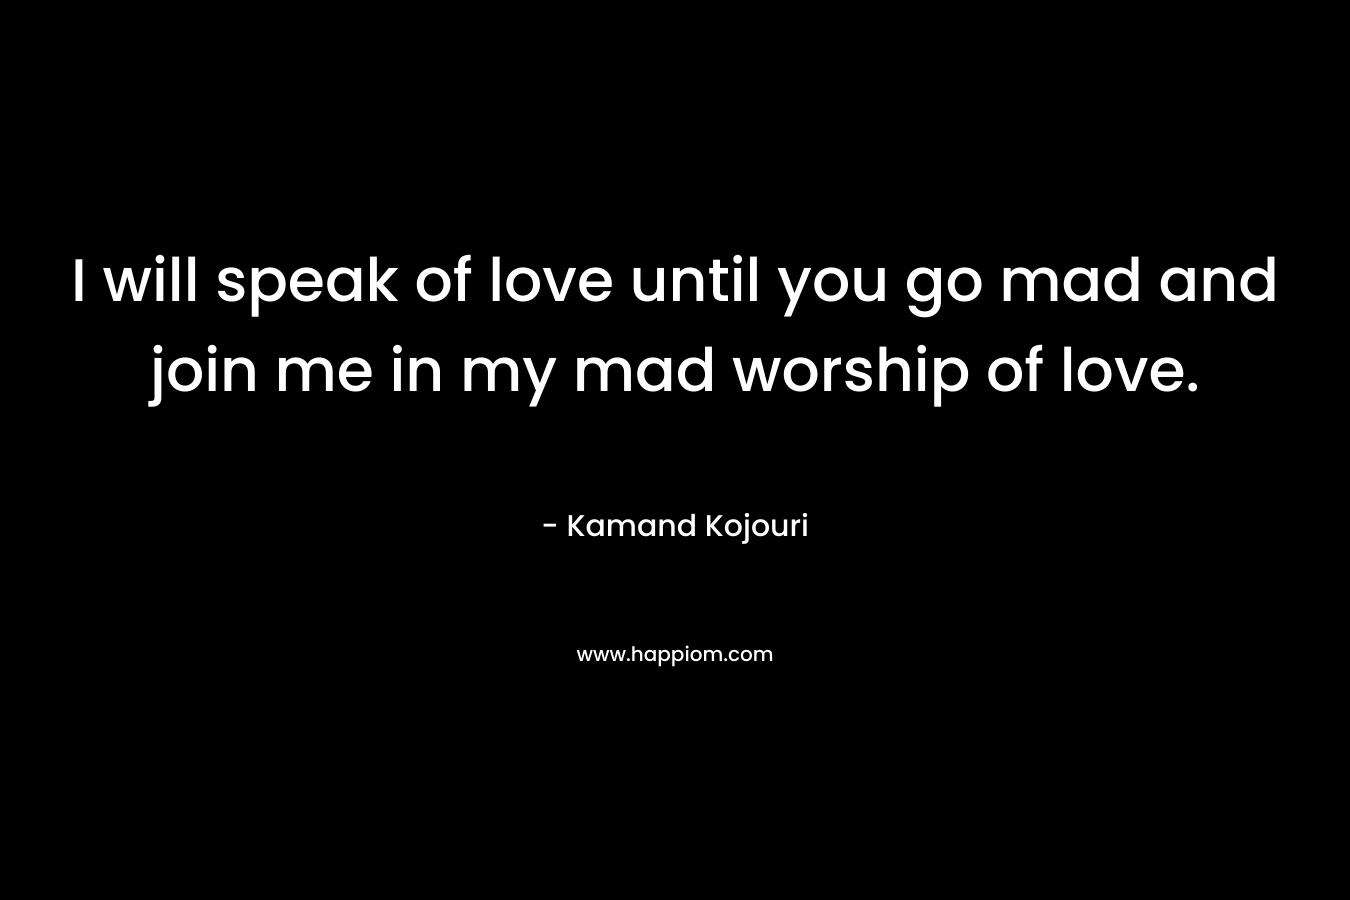 I will speak of love until you go mad and join me in my mad worship of love.